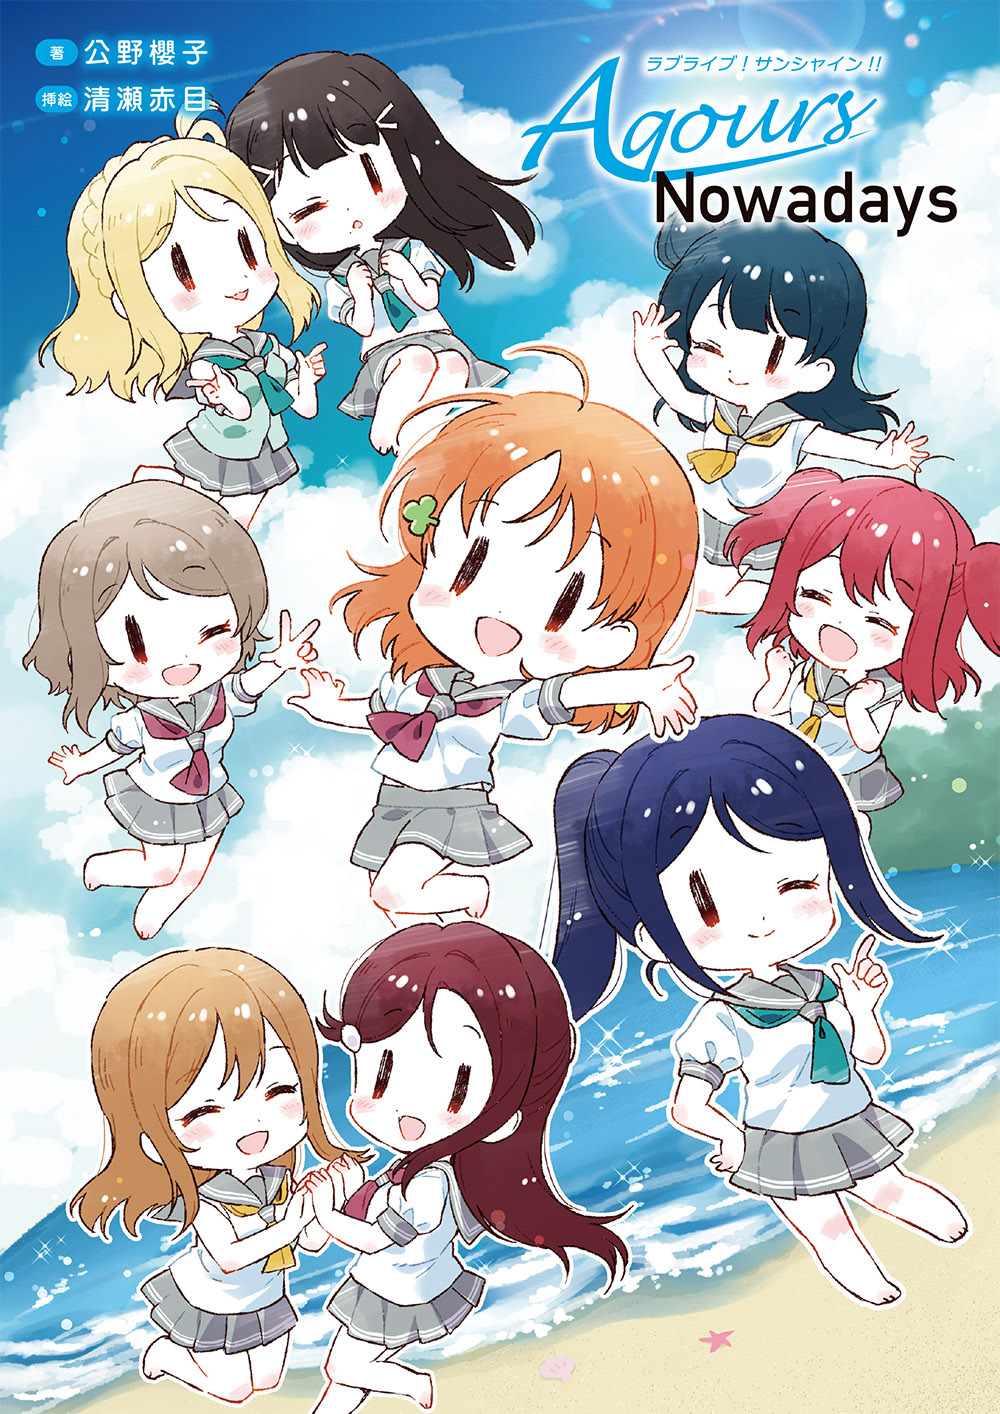 1202_Nowadays_Aqours_cover_ol